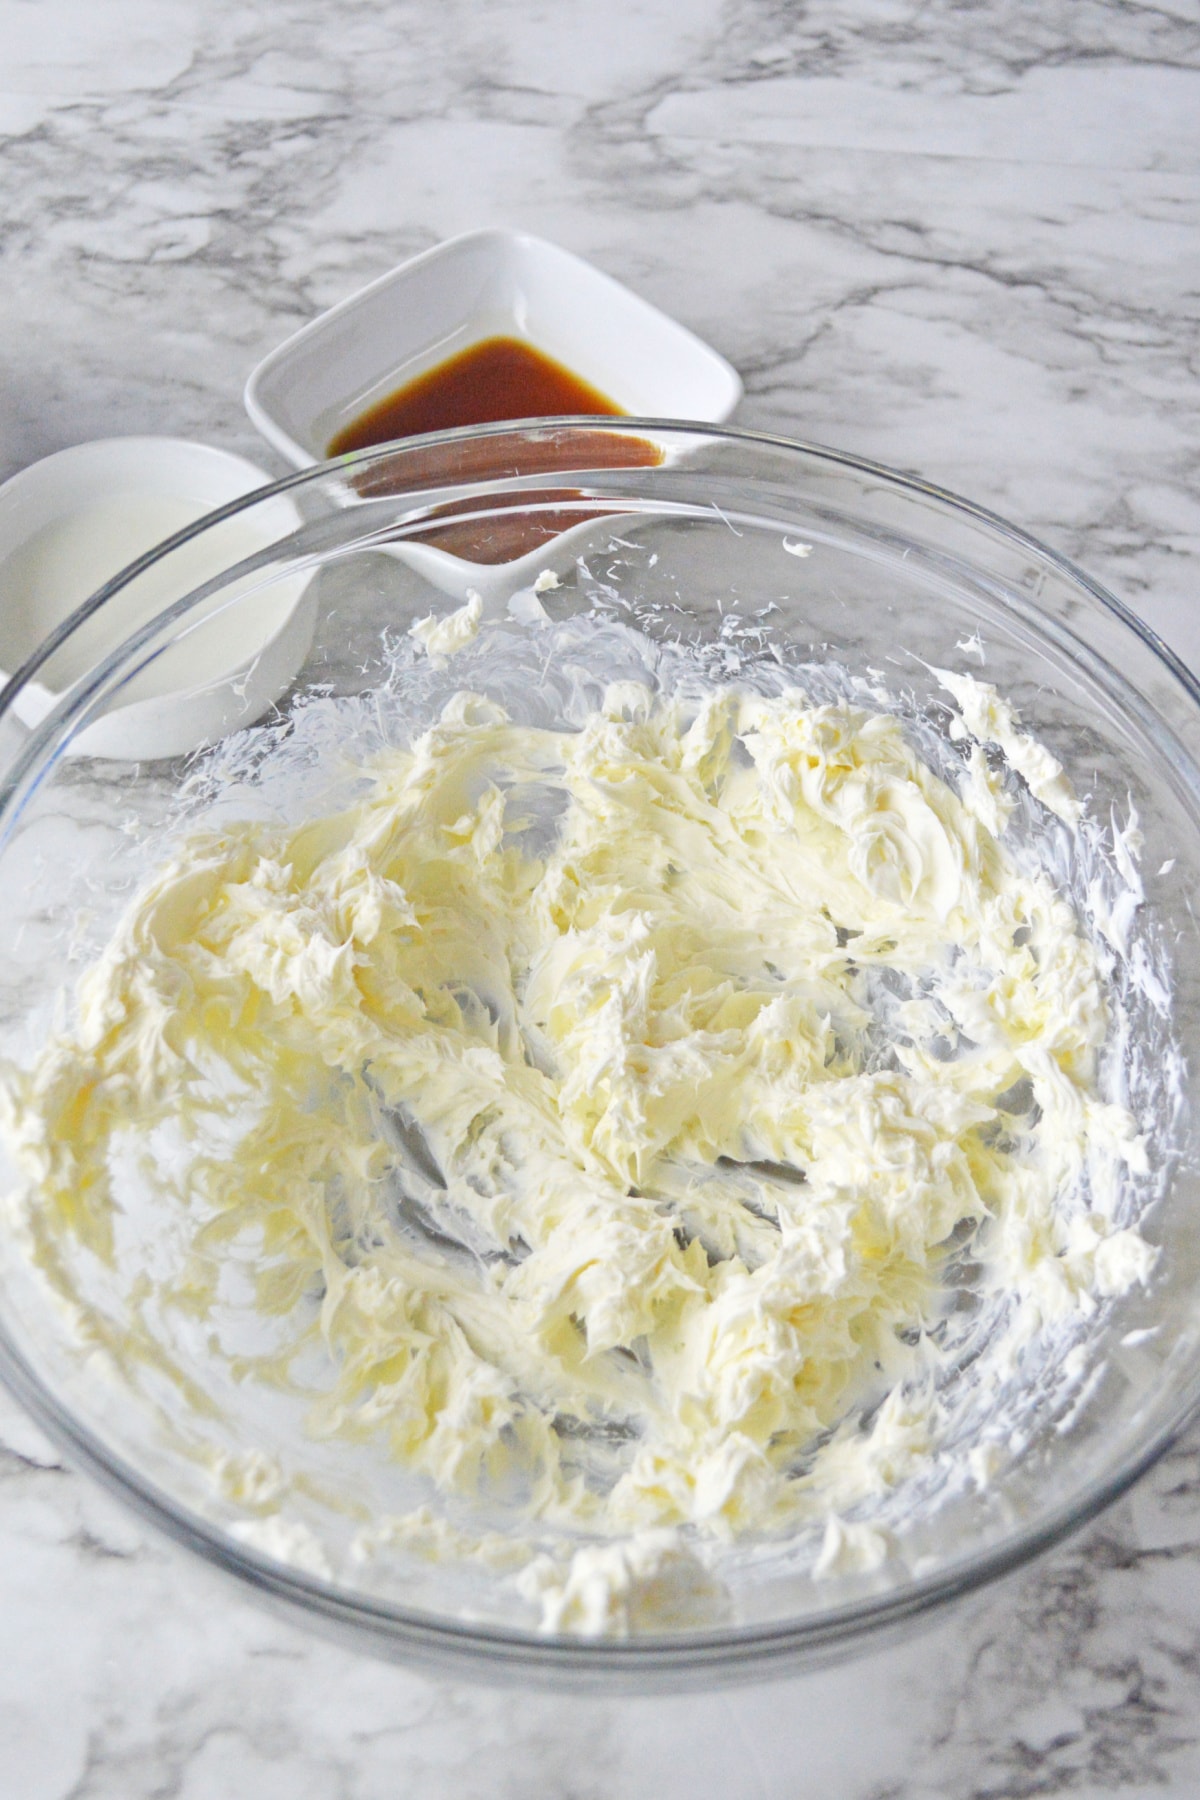 Cream cheese in bowl